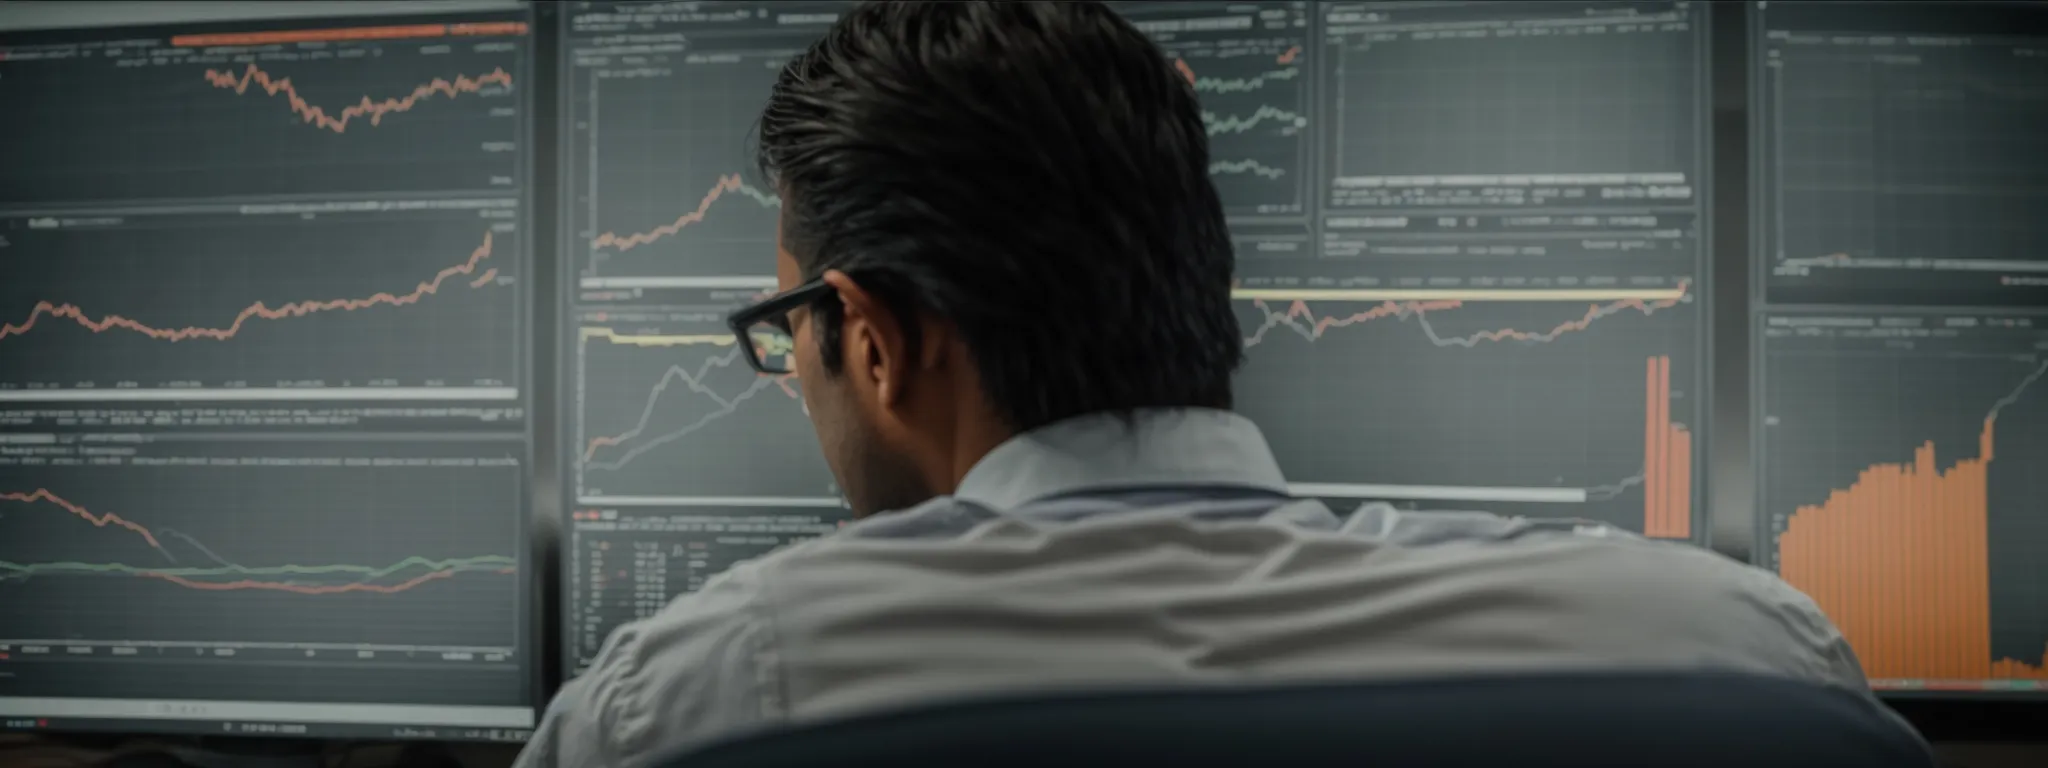 a business executive intently scrutinizing graphs depicting long-term seo investment returns on a computer screen.